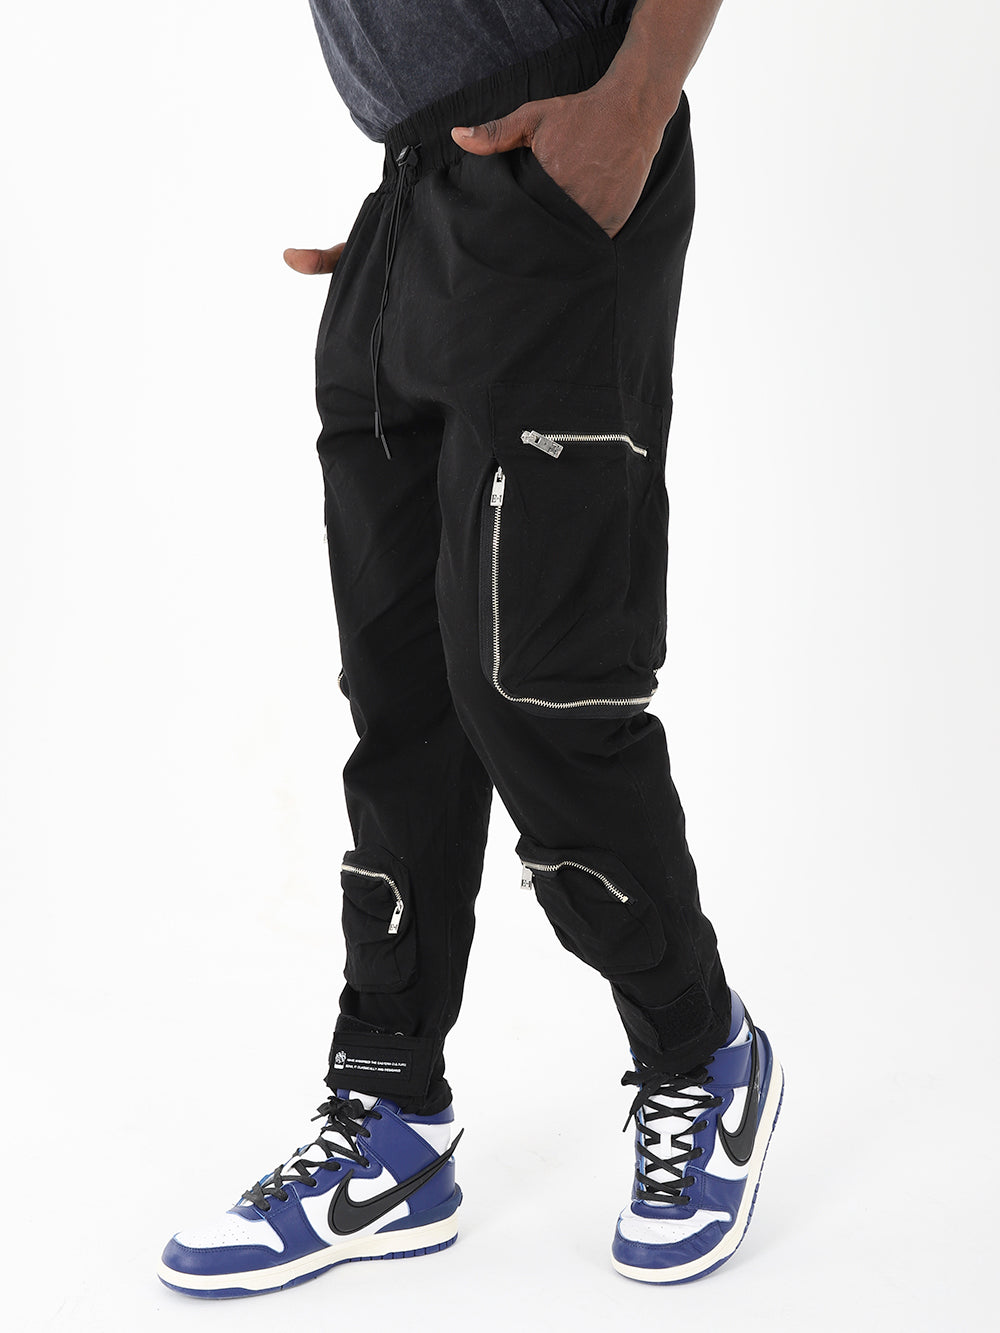 A man wearing RAIDER JOGGERS with zippers.